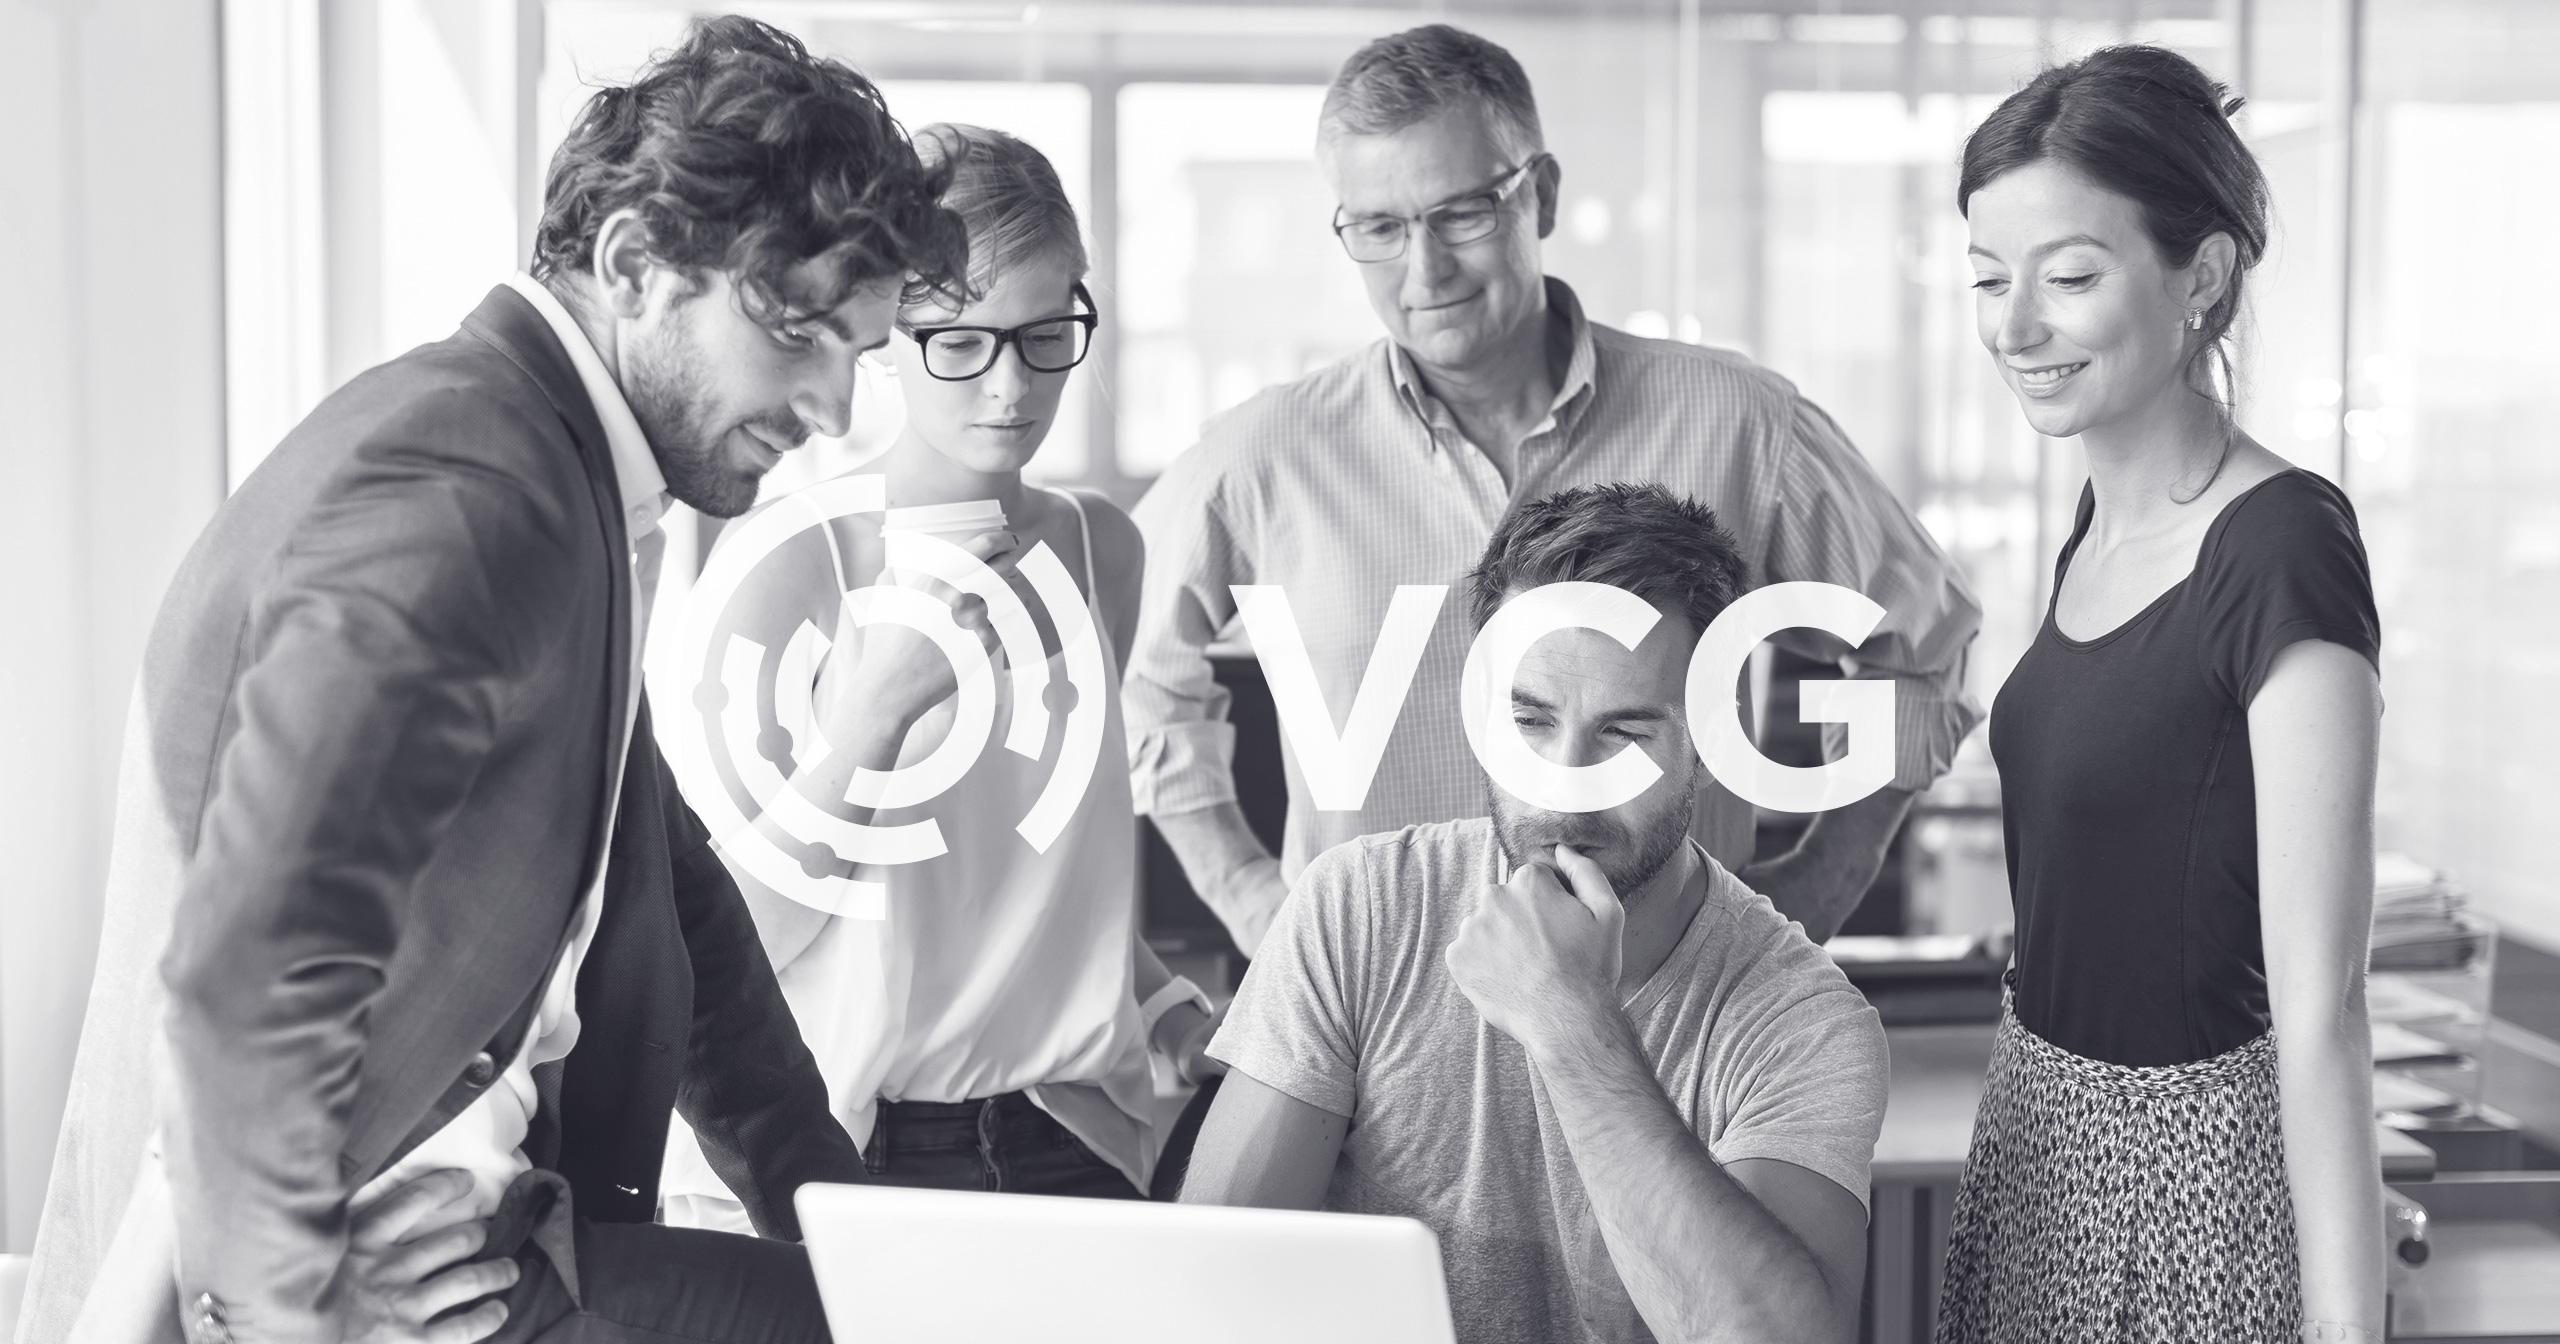 VCG logo and brand imagery showcasing brand refresh with team group photo